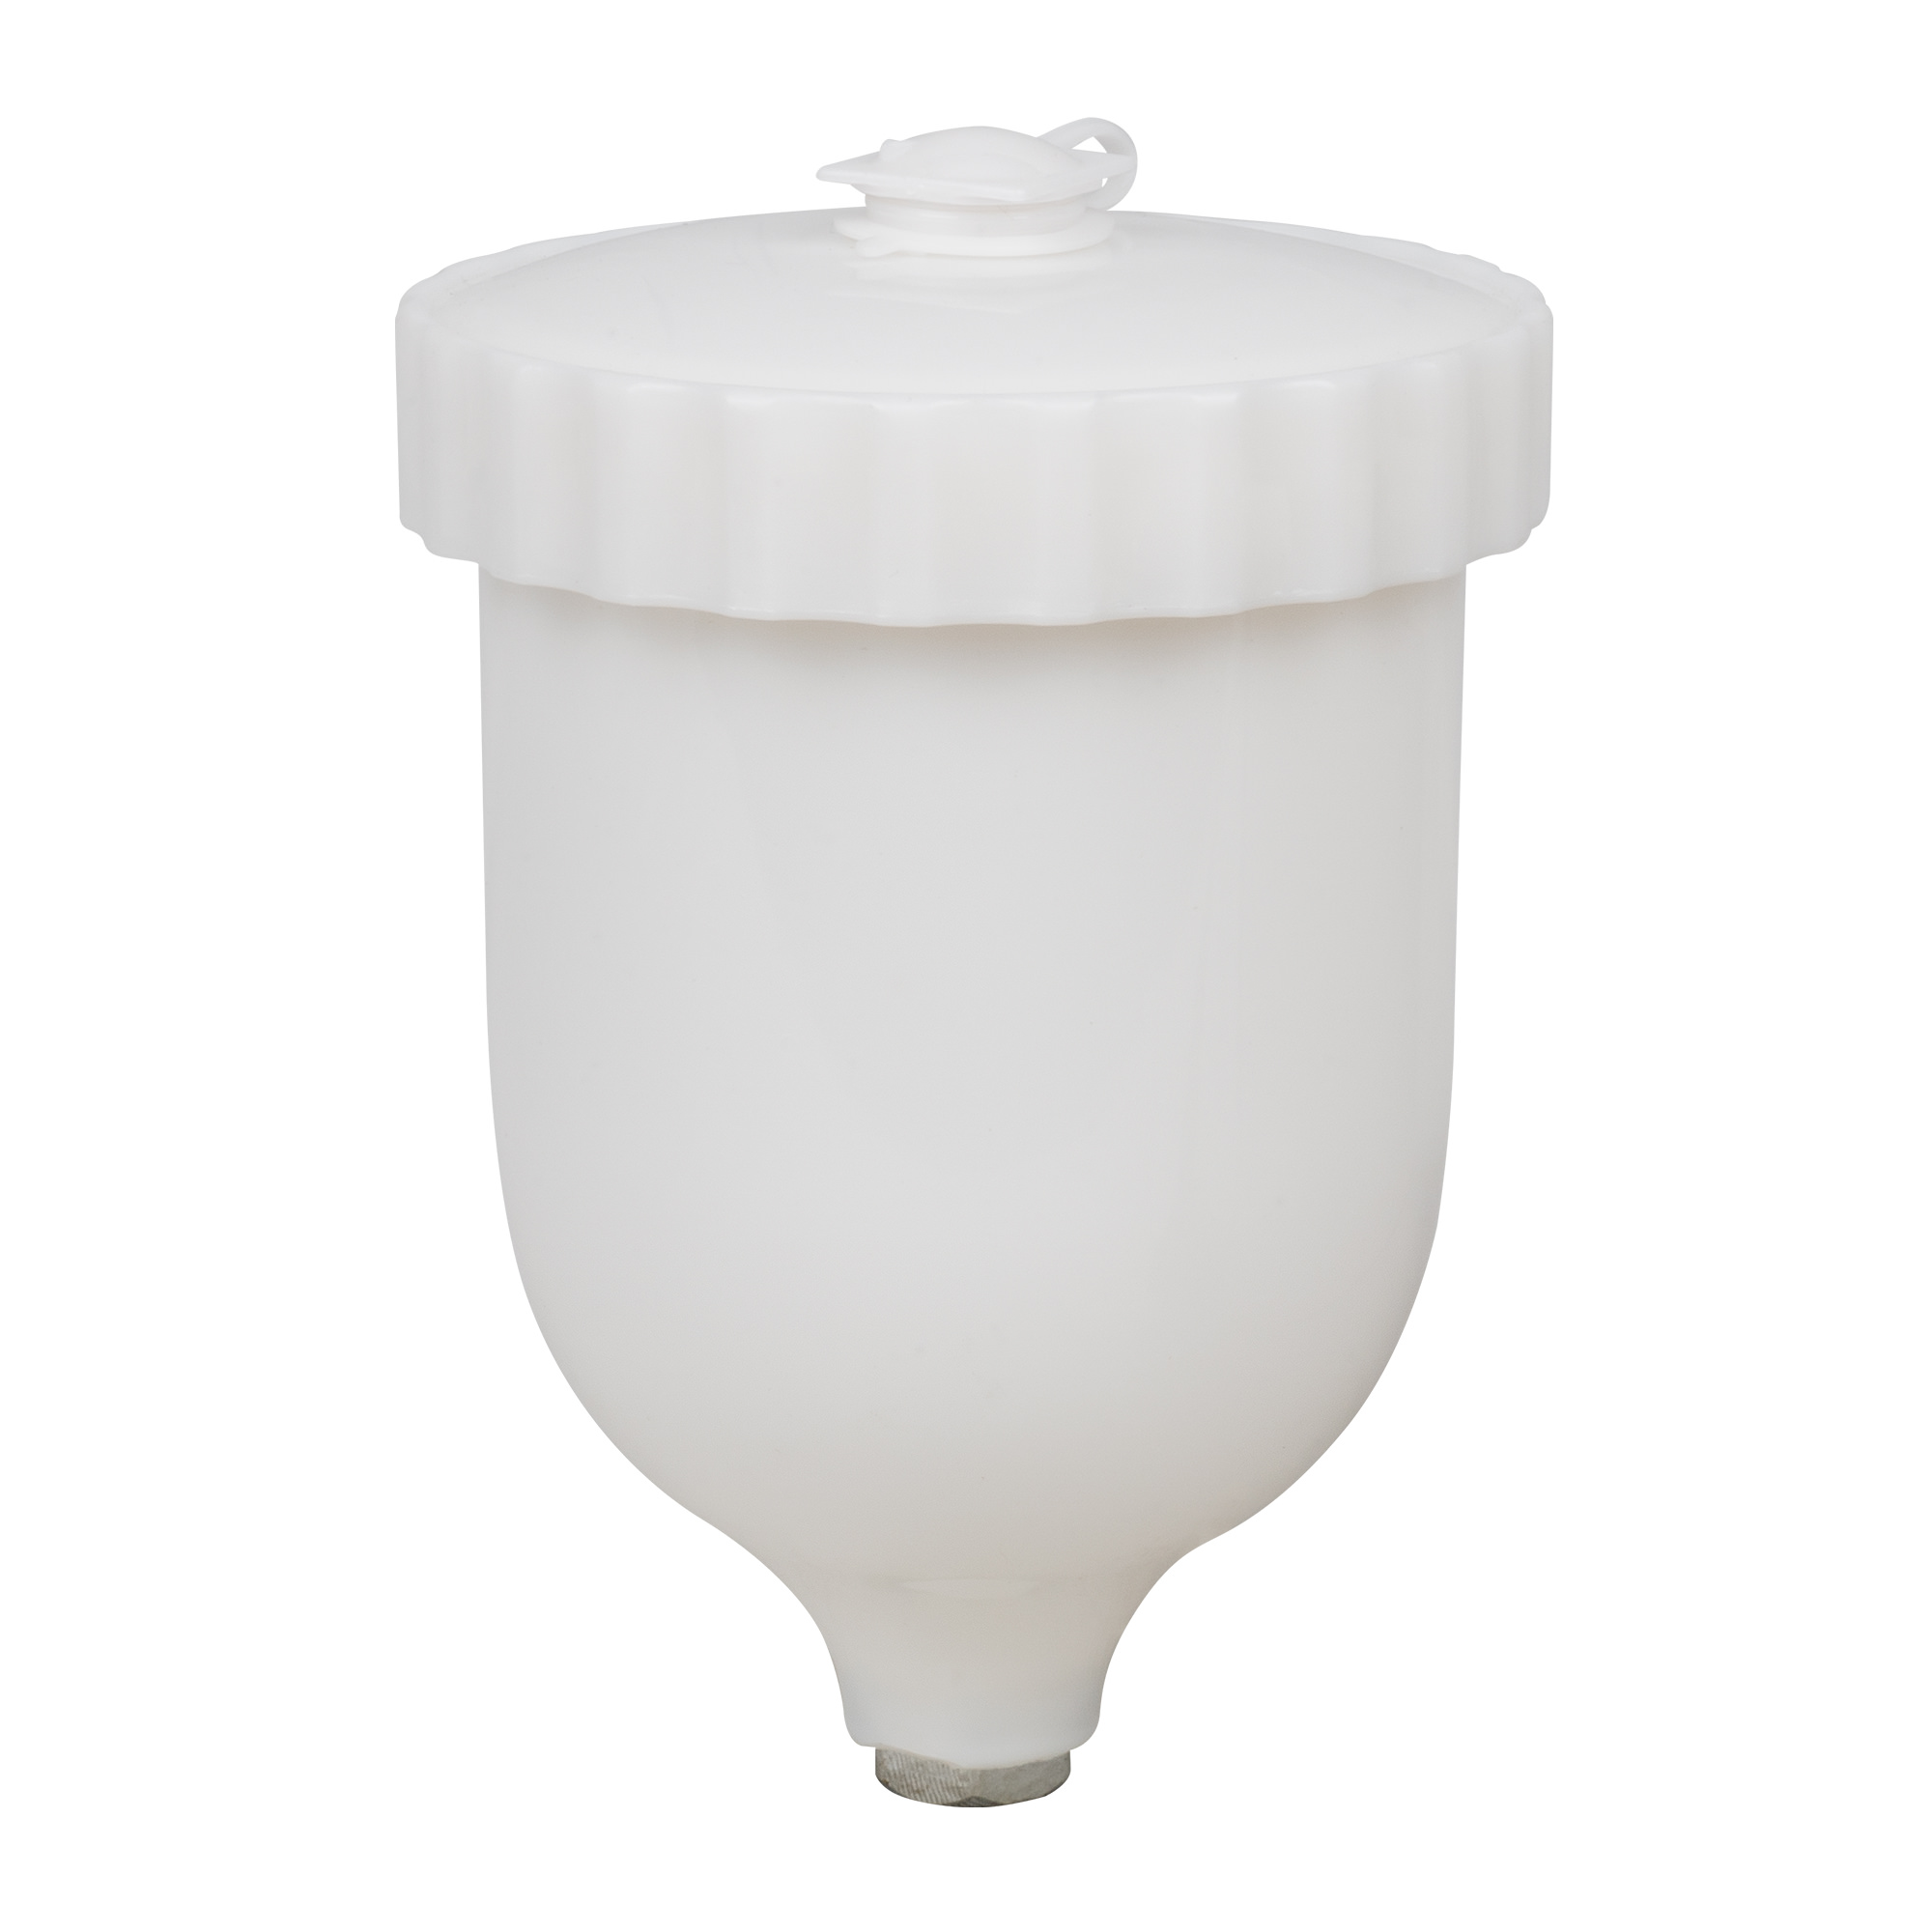 REPLACEMENT TANK FOR REF 54248